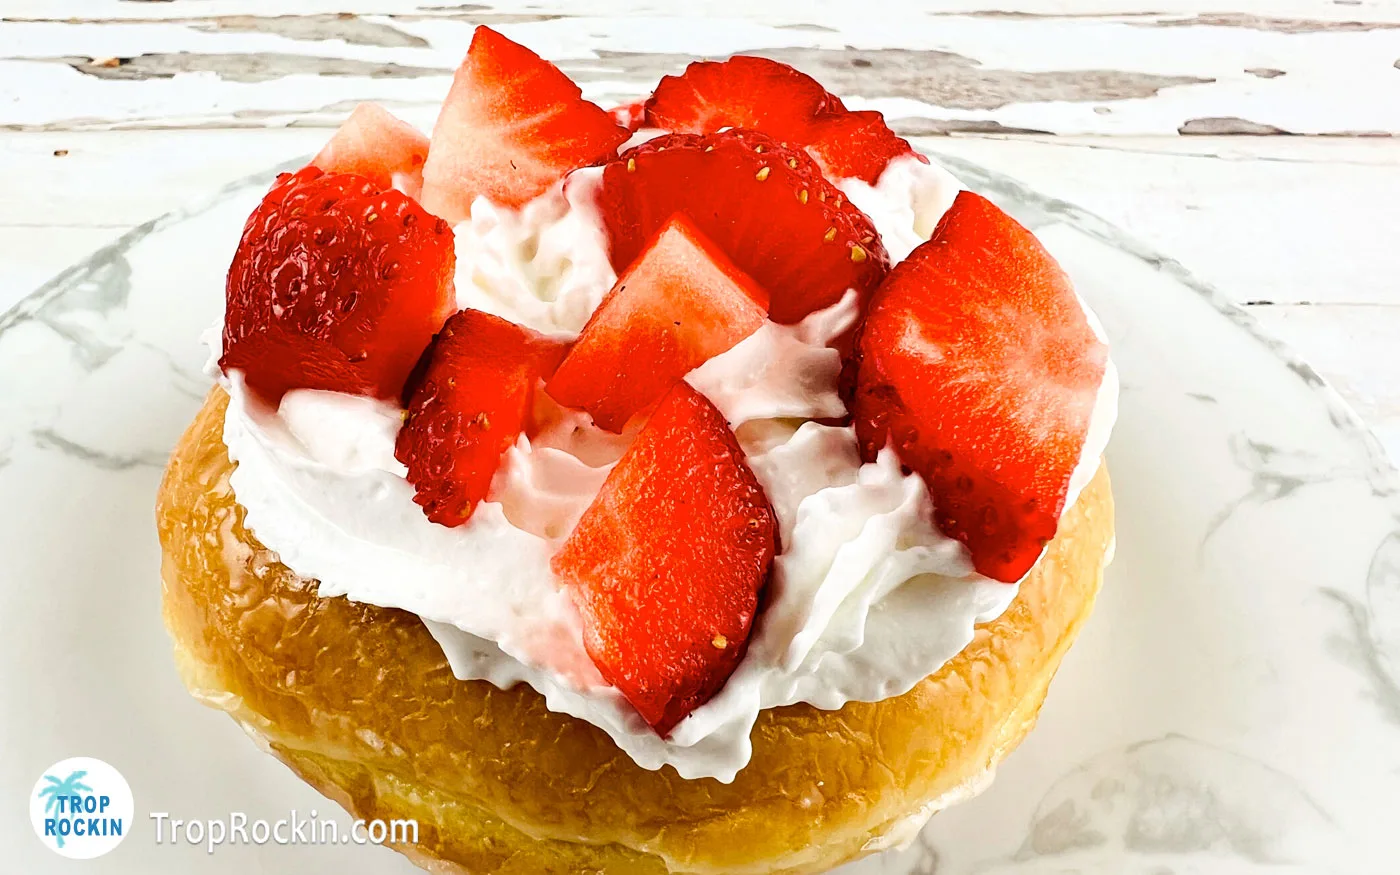 Glazed donut with whipped cream and chopped strawberries on top.